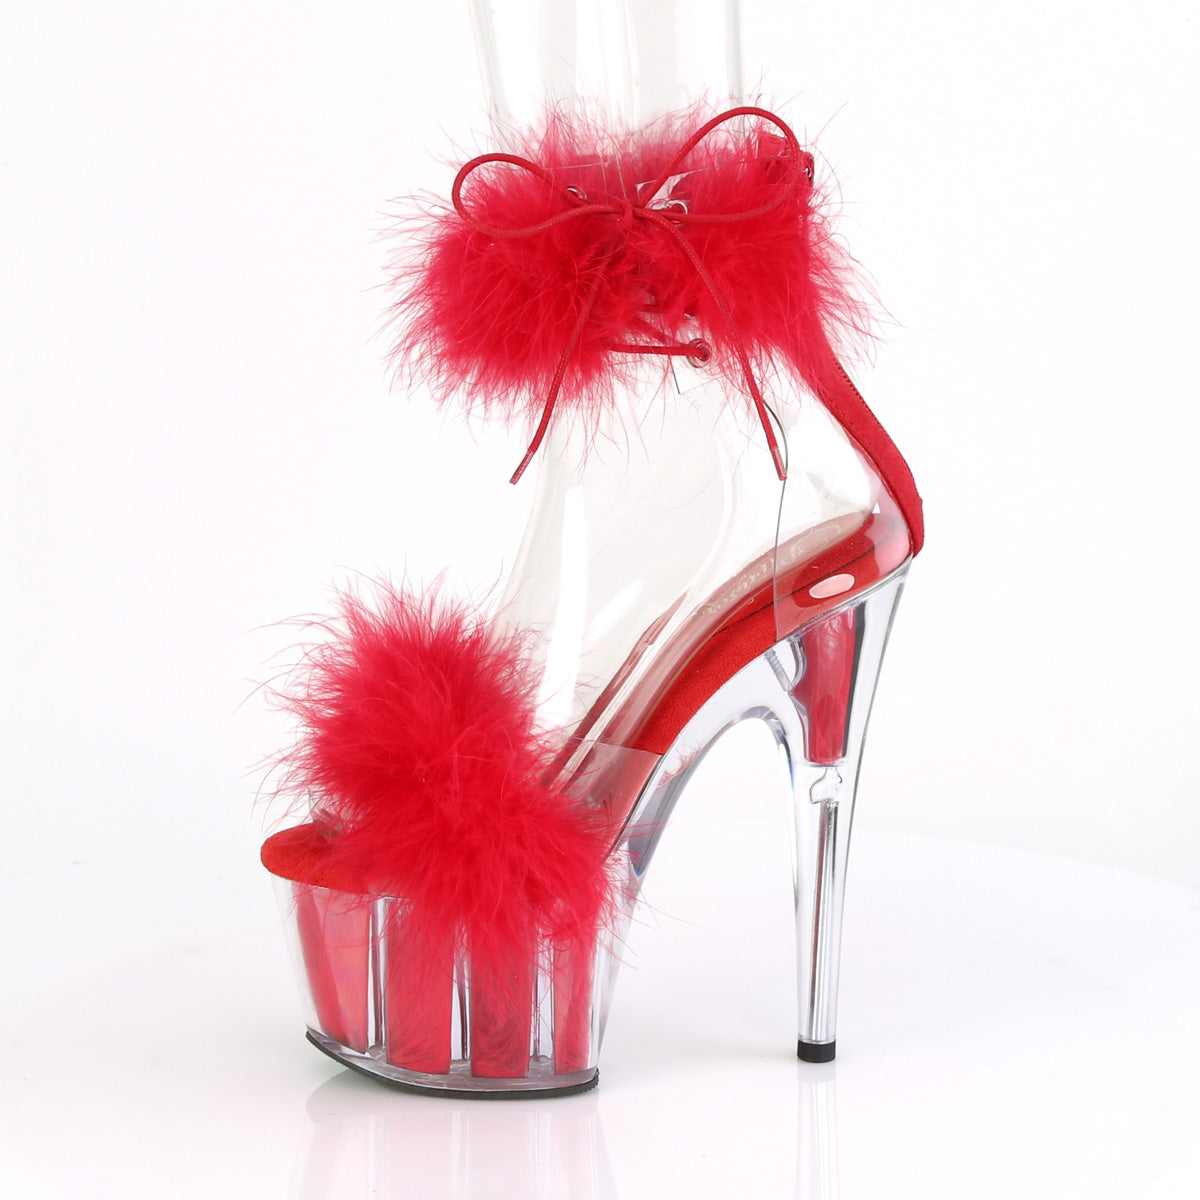 ADORE-724F Pleaser 7" Heel Clear Red Fur Pole Dancing Shoes-Pleaser- Sexy Shoes Pole Dance Heels